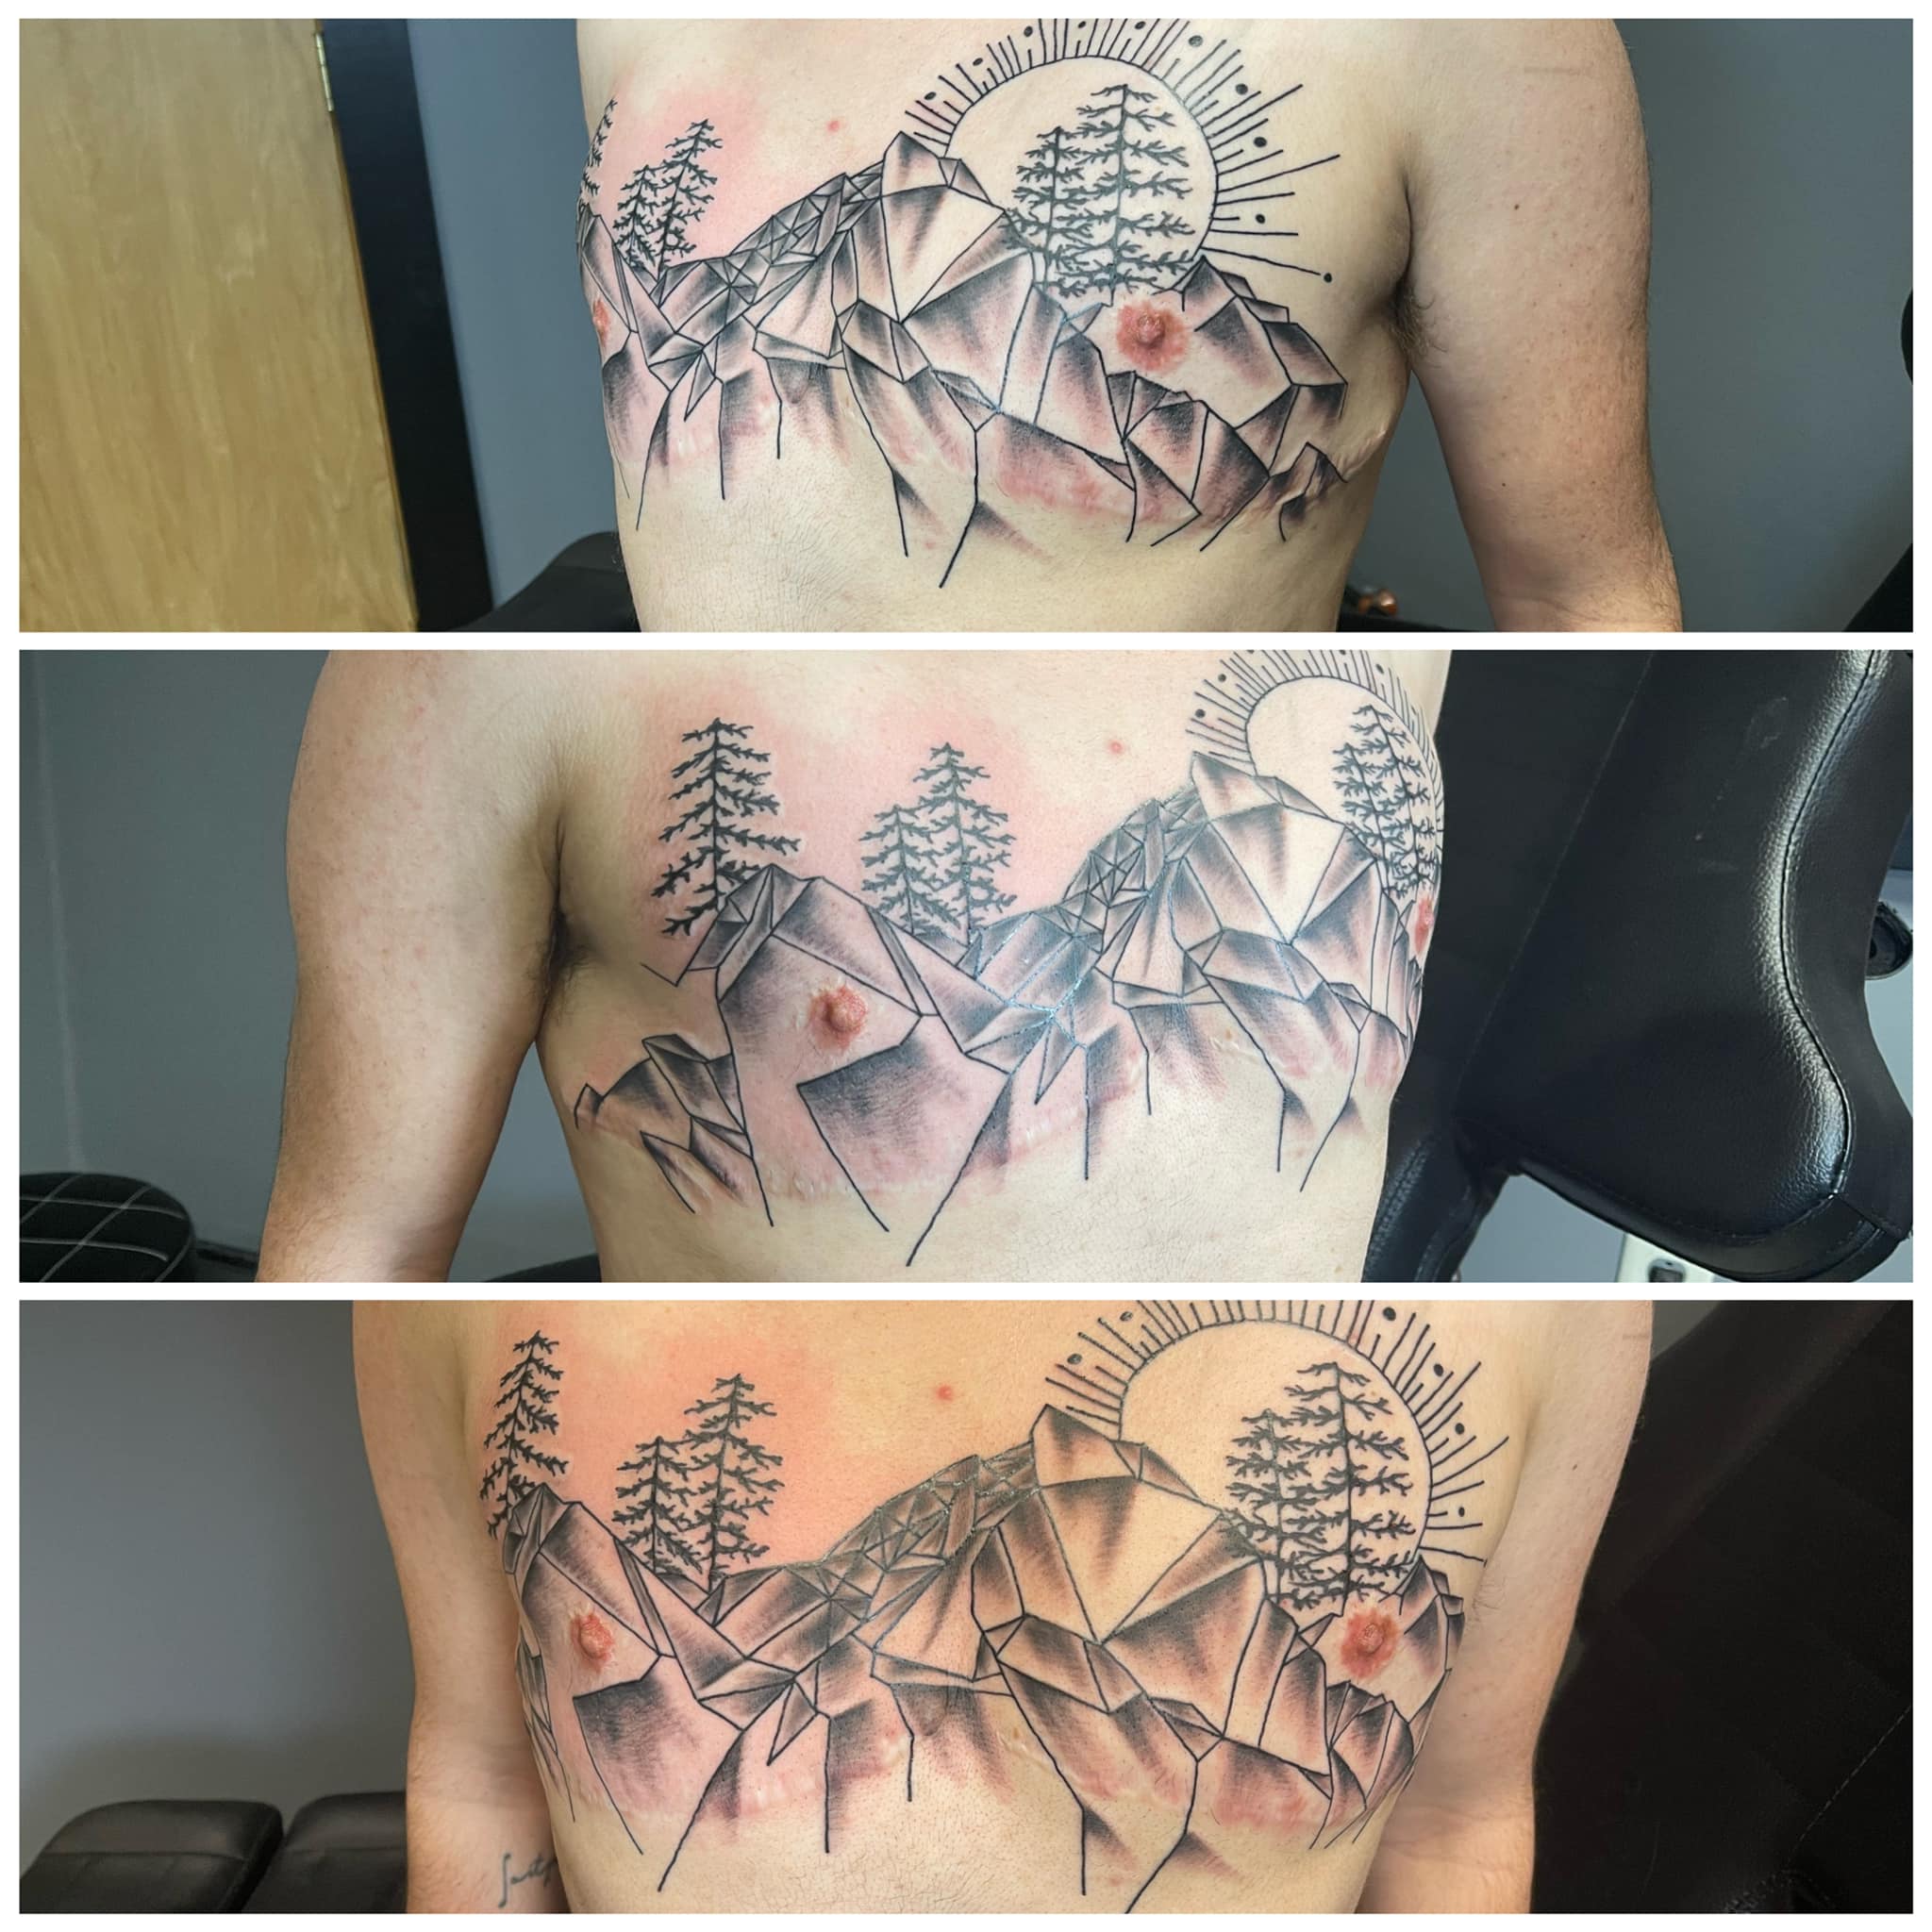 Tattooing over scars in St Albans, VT